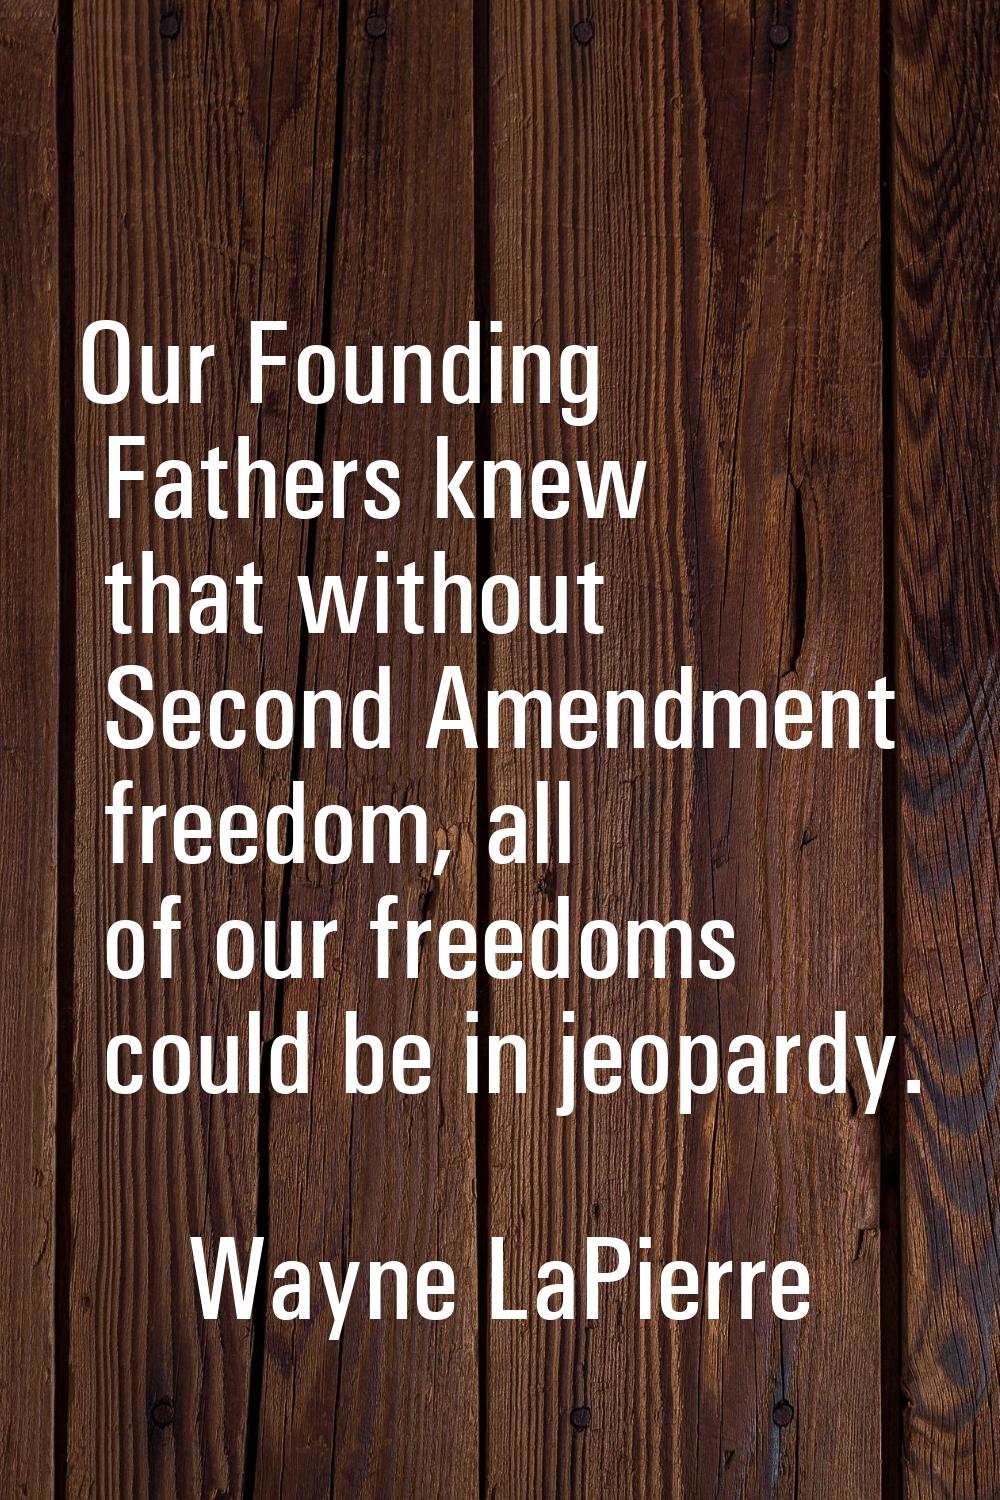 Our Founding Fathers knew that without Second Amendment freedom, all of our freedoms could be in je